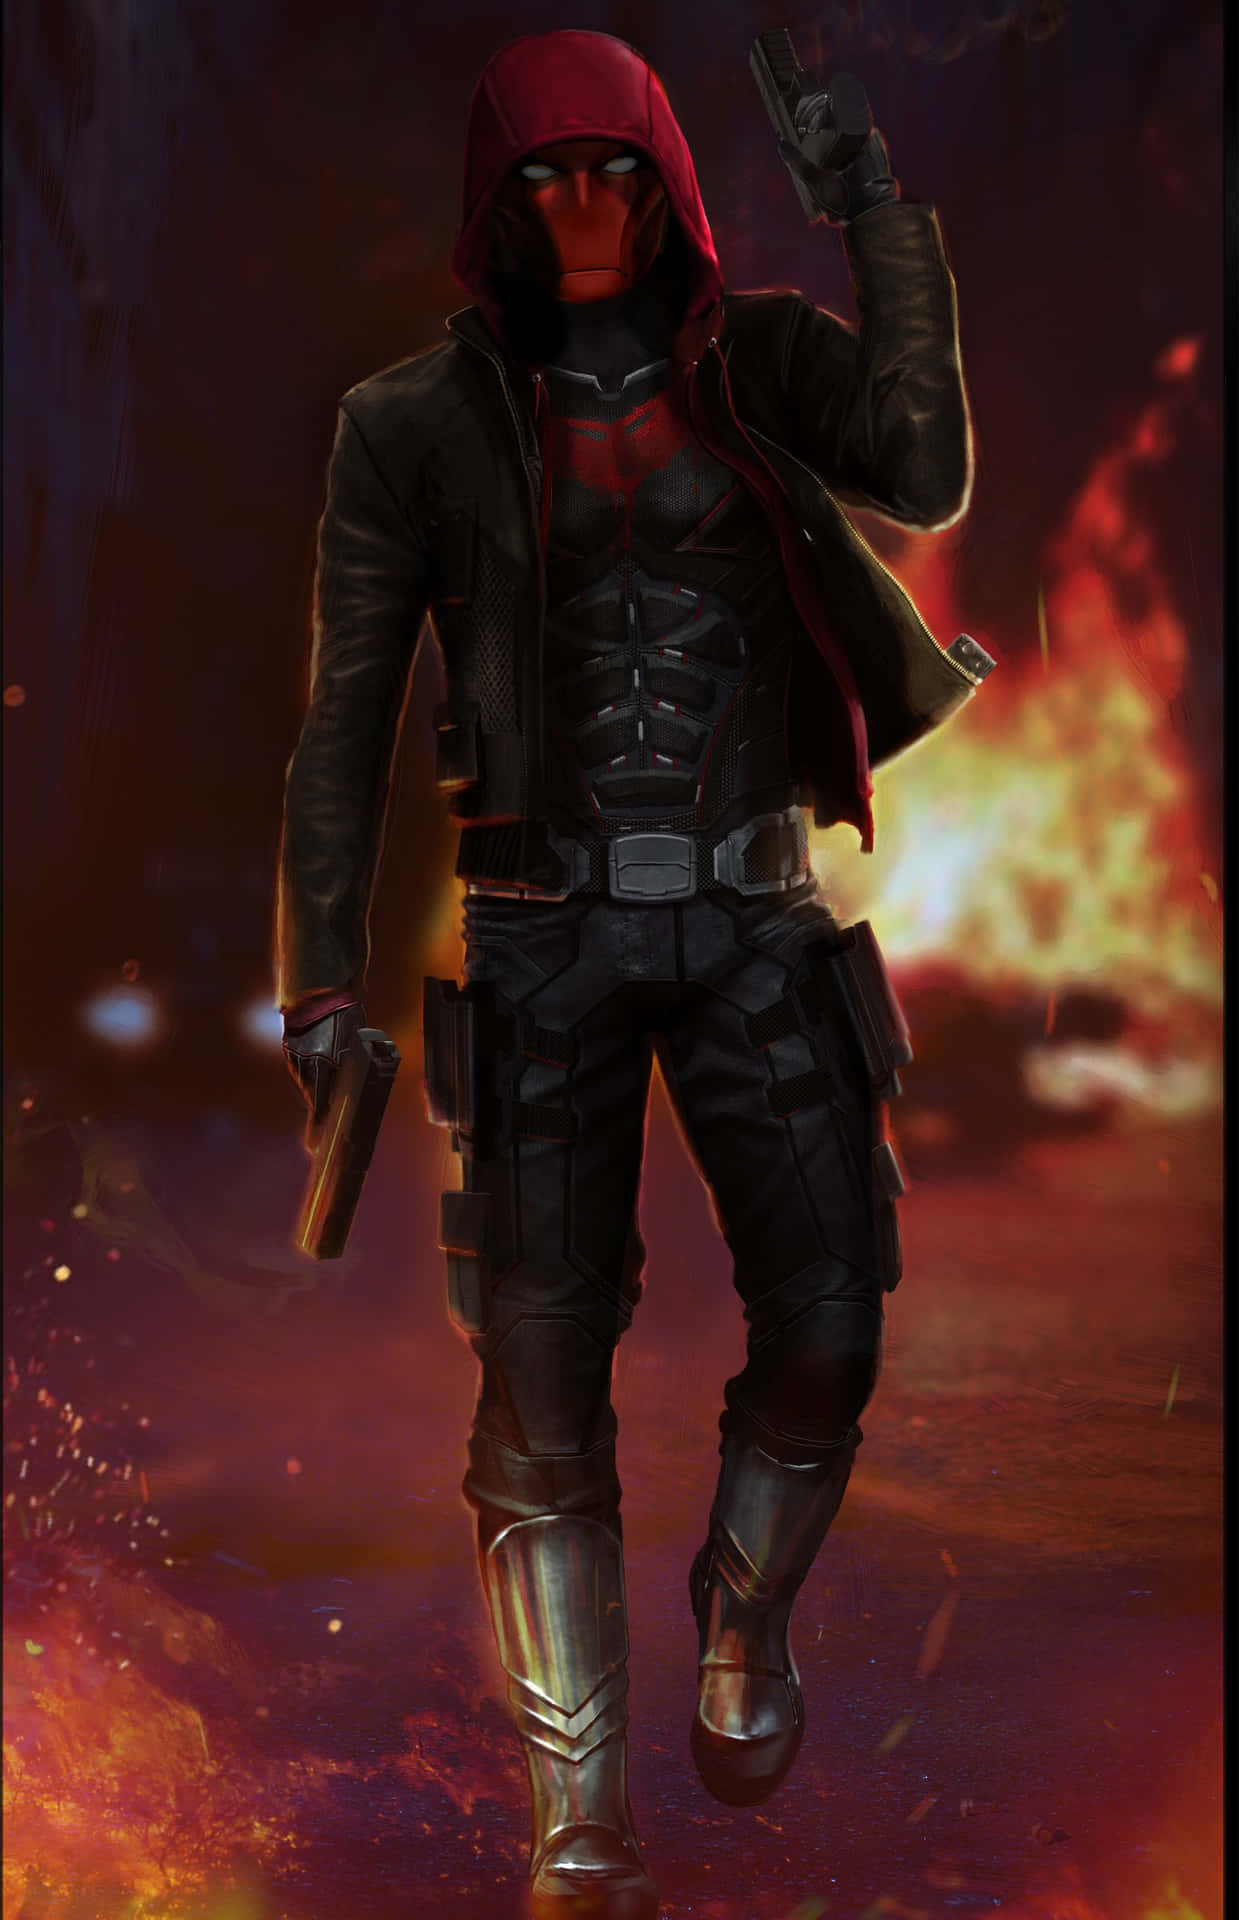 A mysterious Red Hood dressed in a somber black cape sets out on a quest.